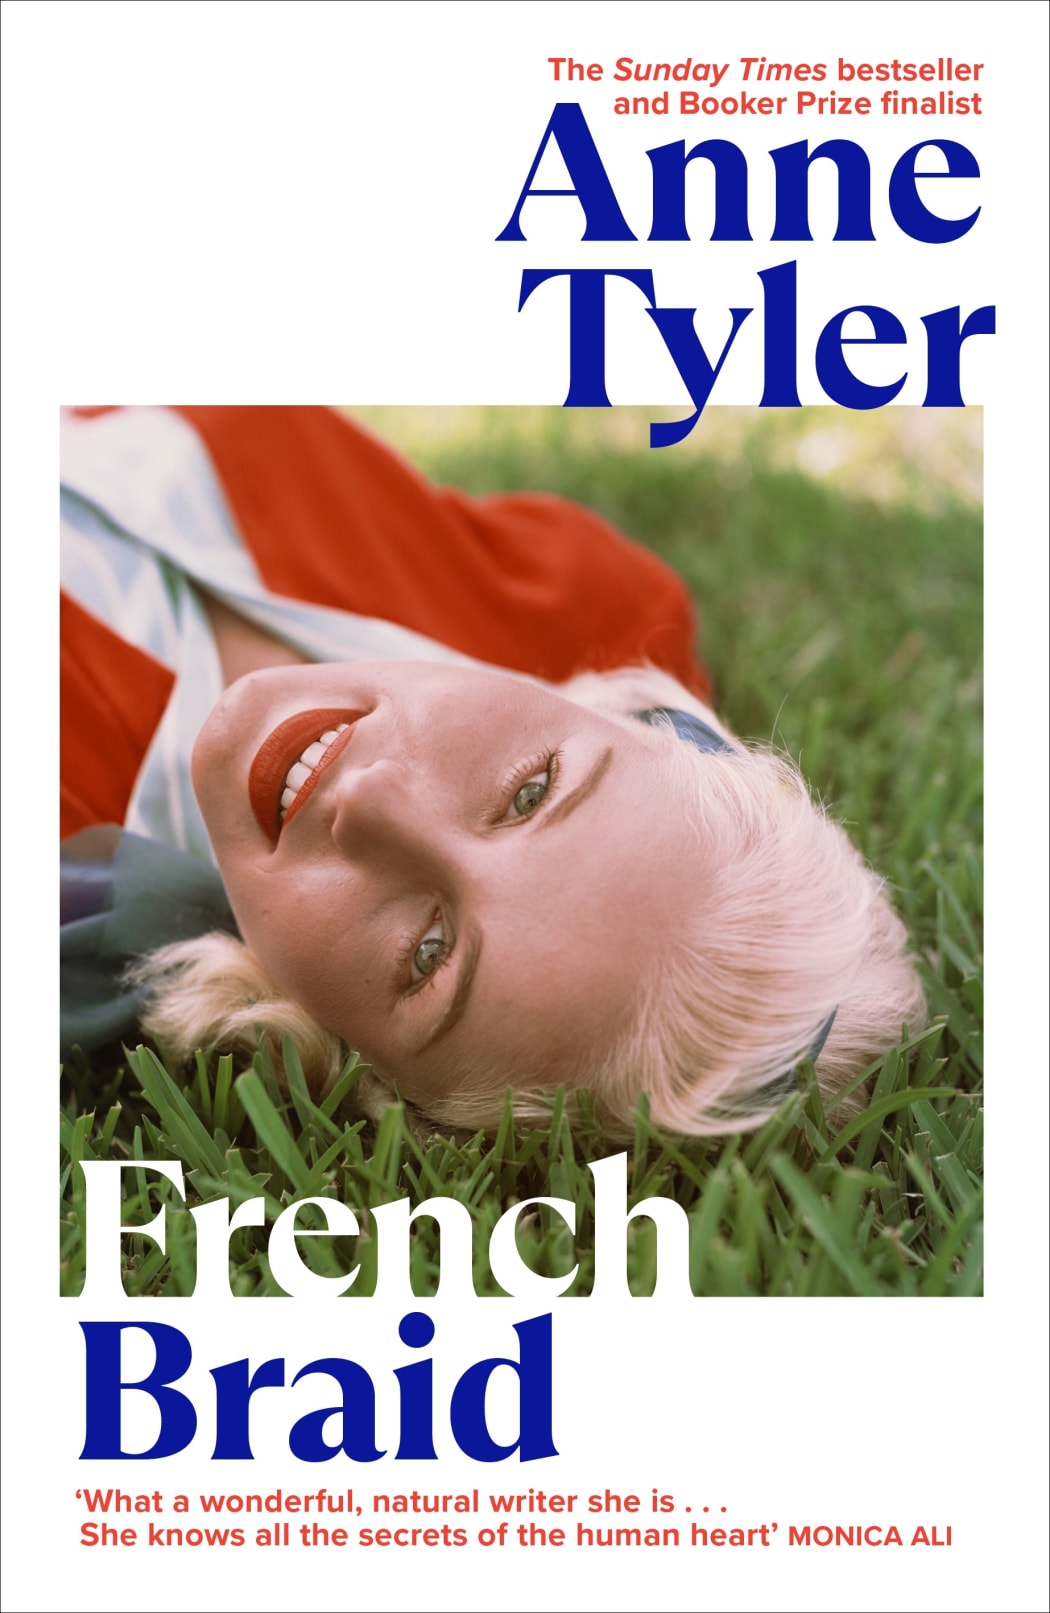 book review for french braid